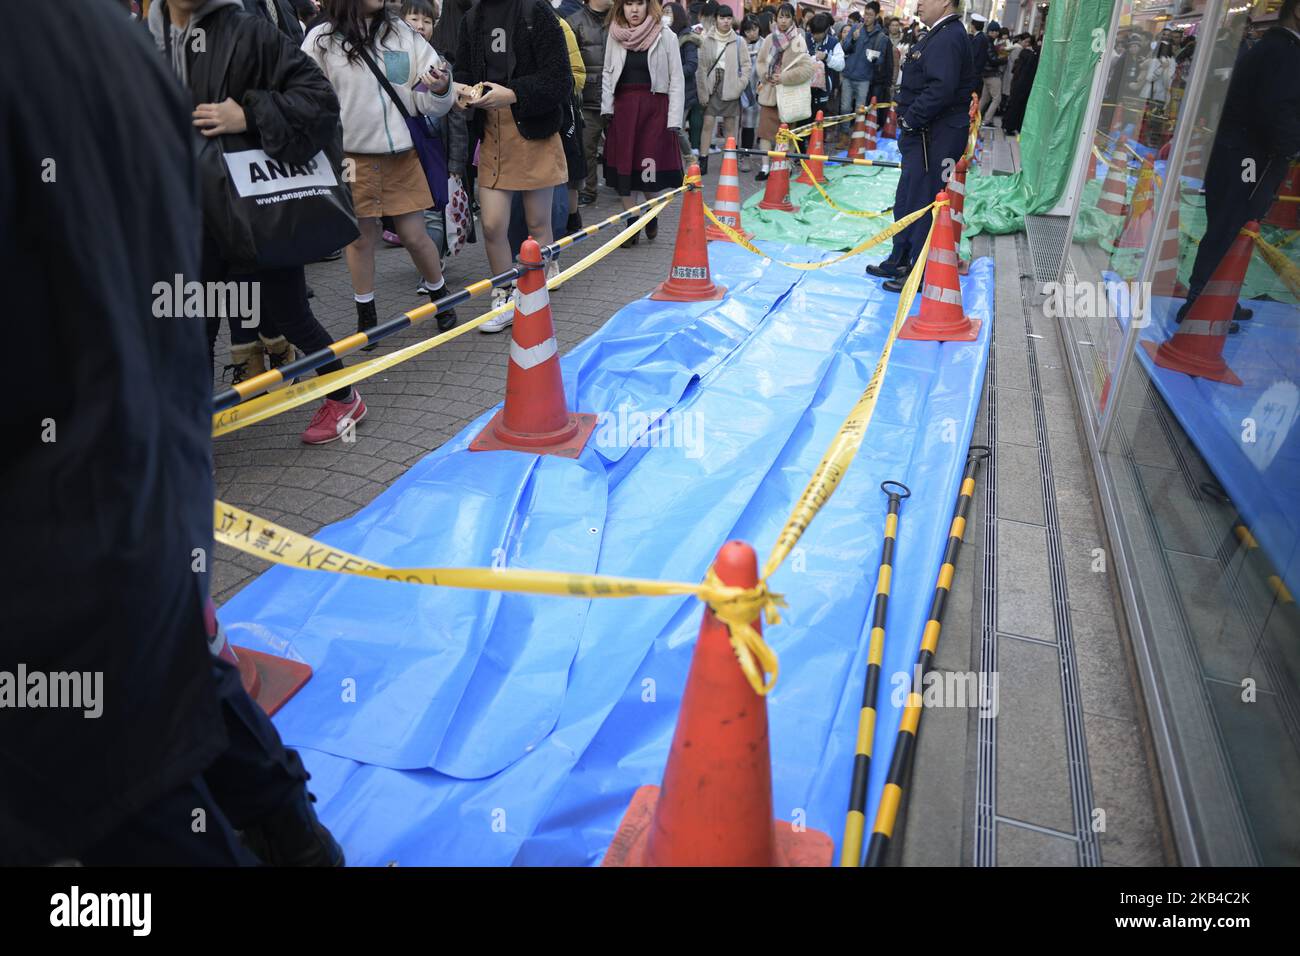 Policemen stand next to a crime scene which plowed into pedestrians in Harajuku, Tokyo, Japan on January 1, 2019. Police arrested Kazuhiro Kusakabe, 21, who was driving the rental car with an Osaka license plate, on suspicion of attempted murder. (Photo by Richard Atrero de Guzman/NurPhoto) Stock Photo